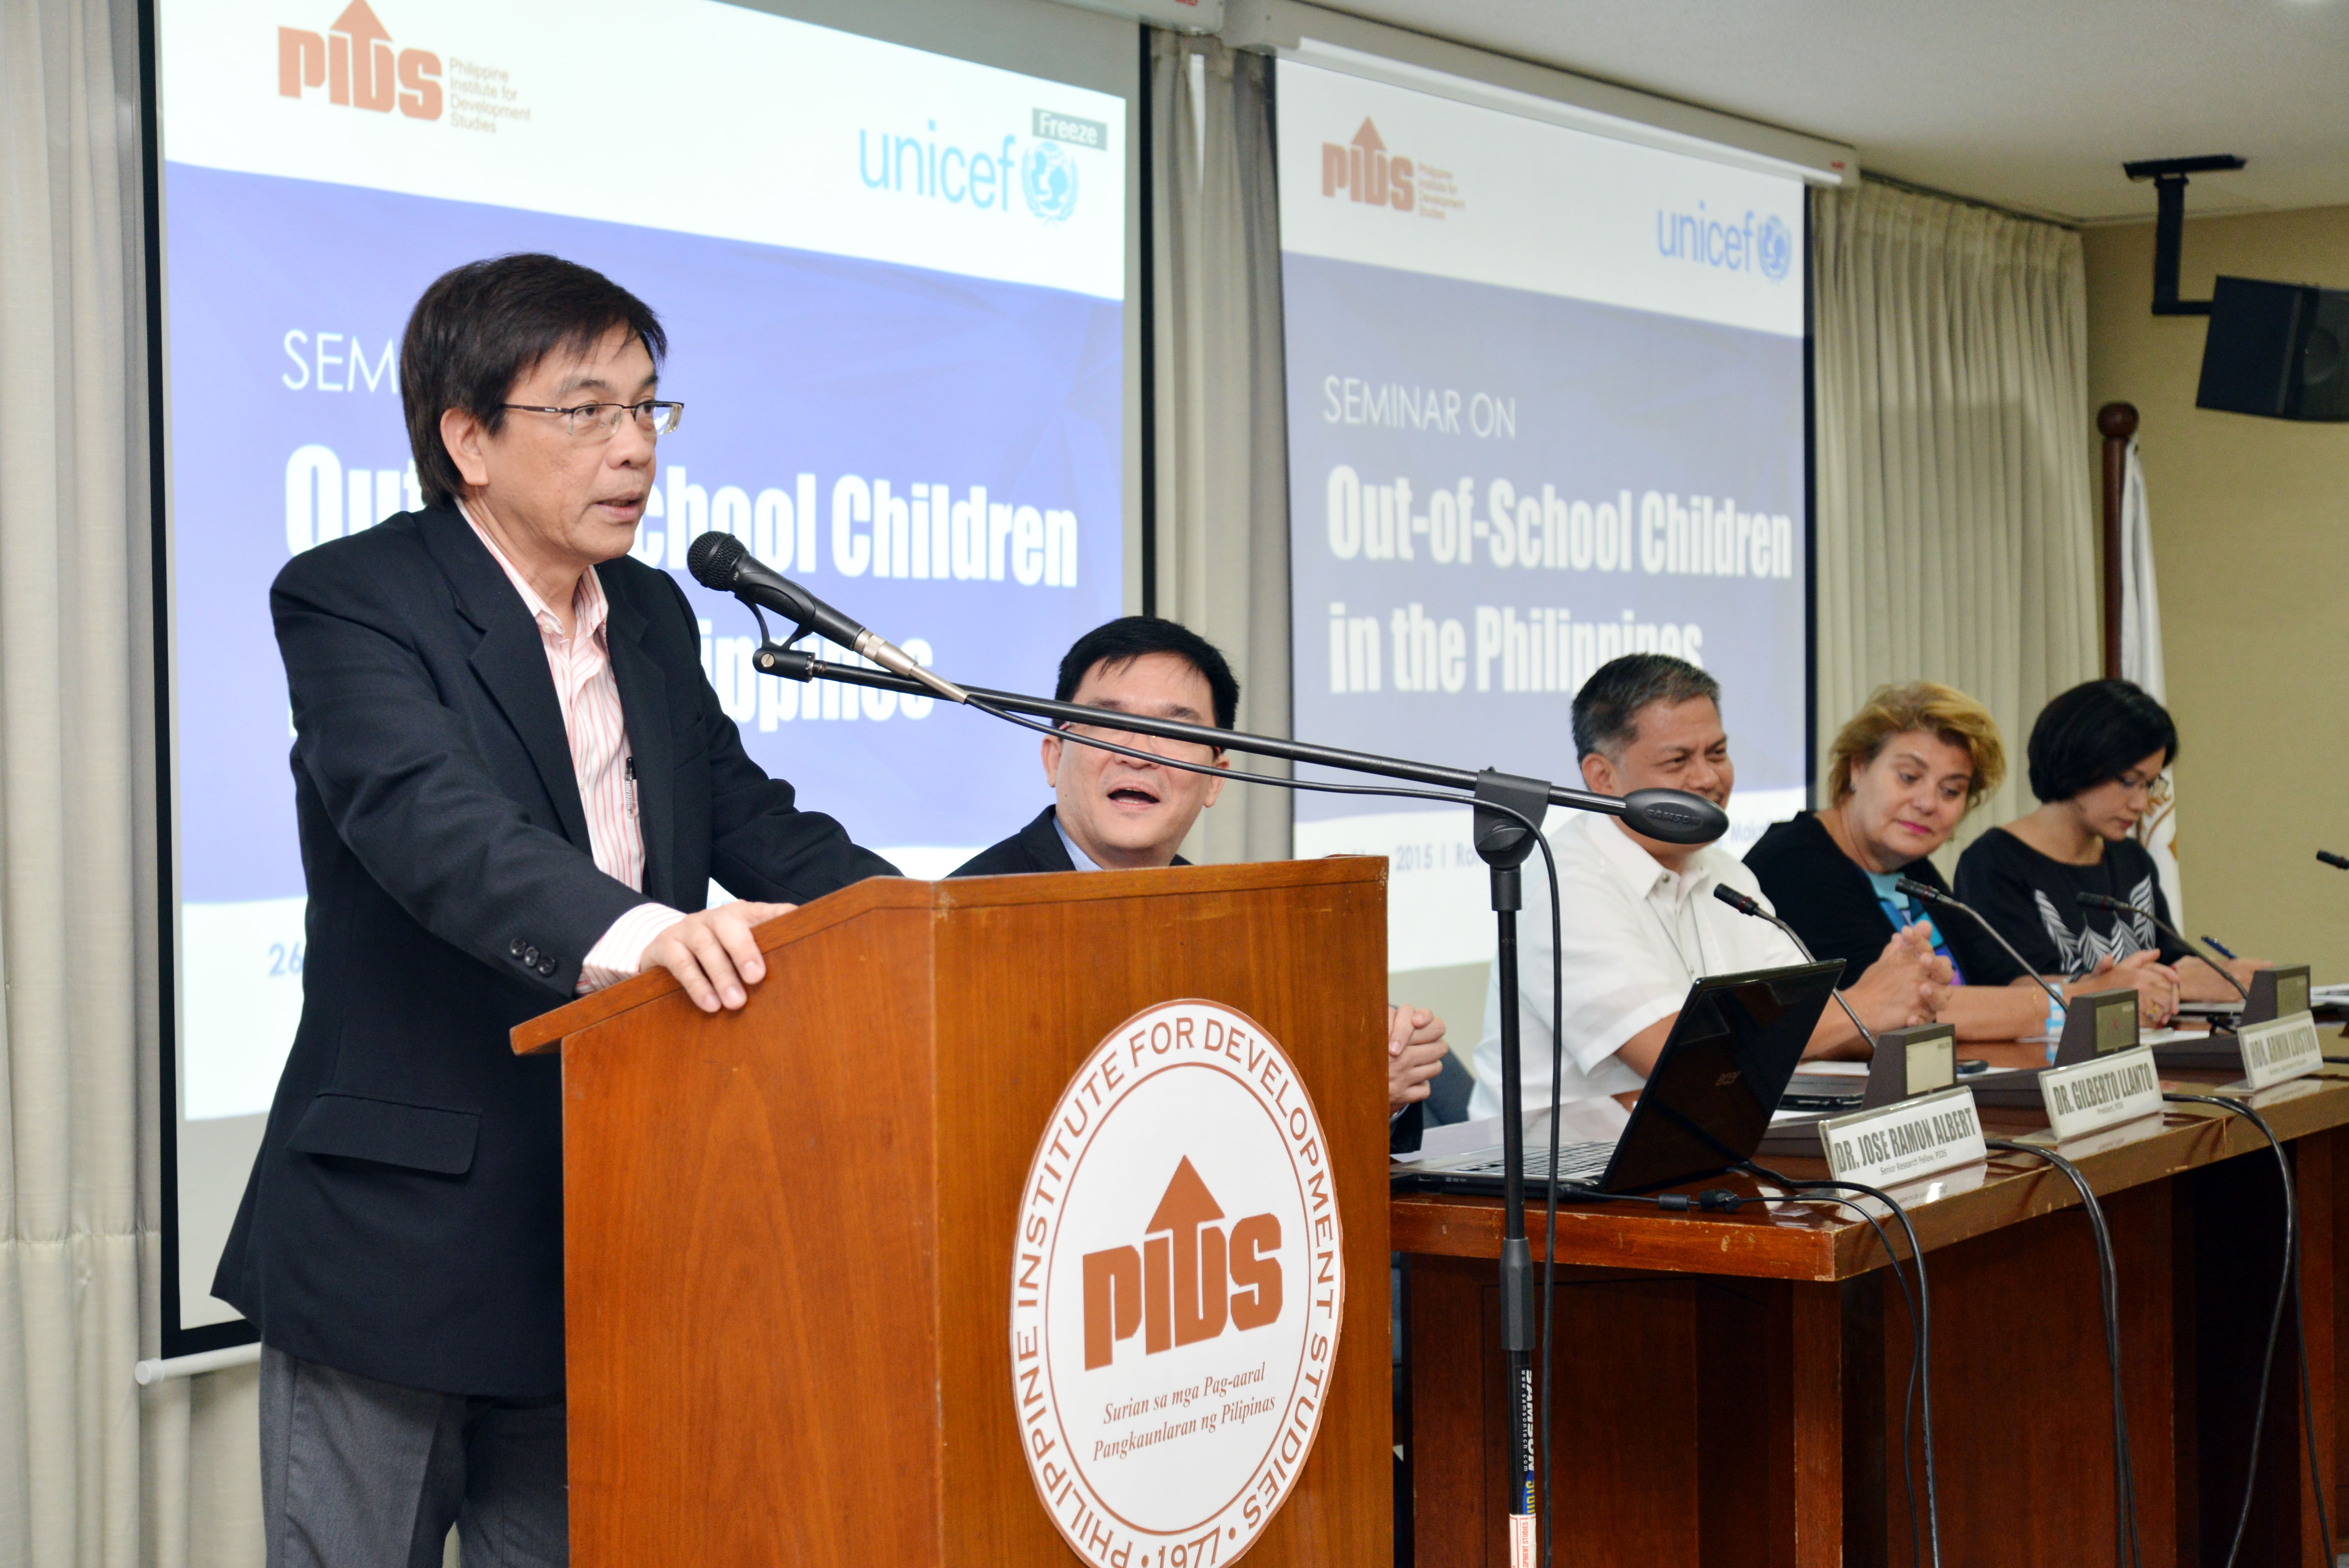 Seminar On Out-Of-School Children (OOSC) In The Philippines-DSC_3073.jpg